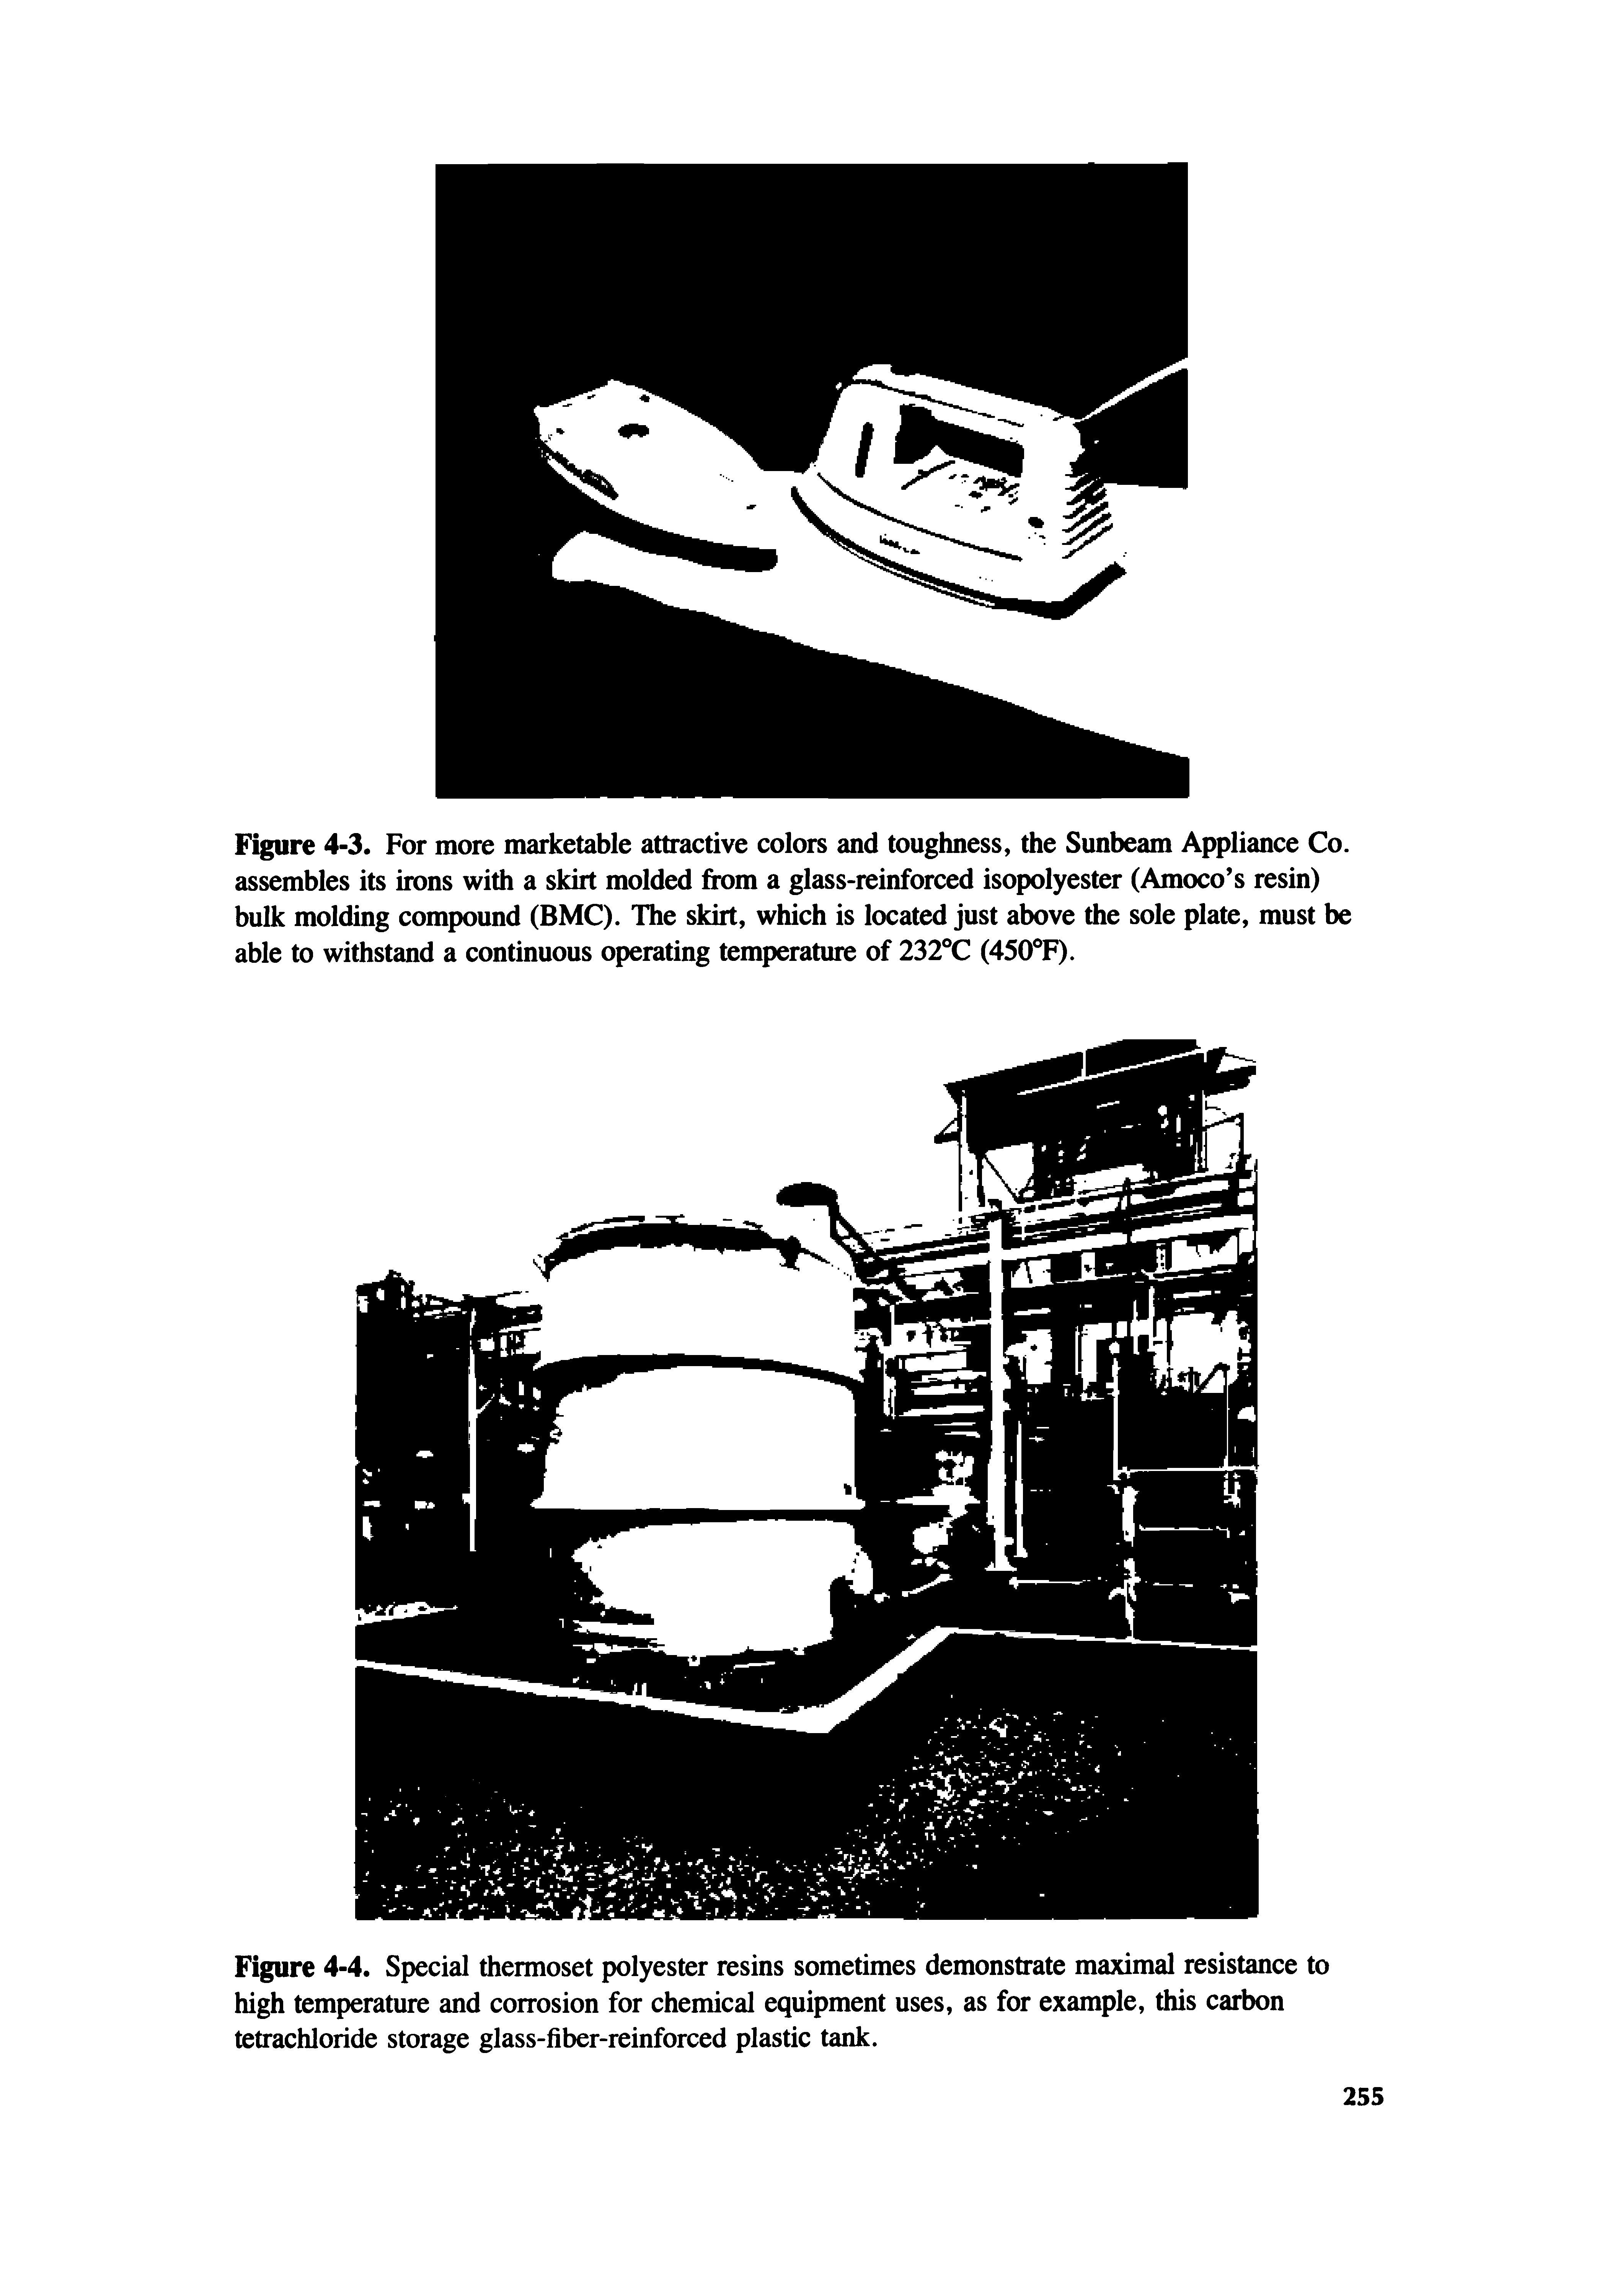 Figure 4-4. Special thermoset polyester resins sometimes demonstrate maximal resistance to high temperature and corrosion for chemical equipment uses, as for example, this carbon tetrachloride storage glass-fiber-reinforced plastic tank.